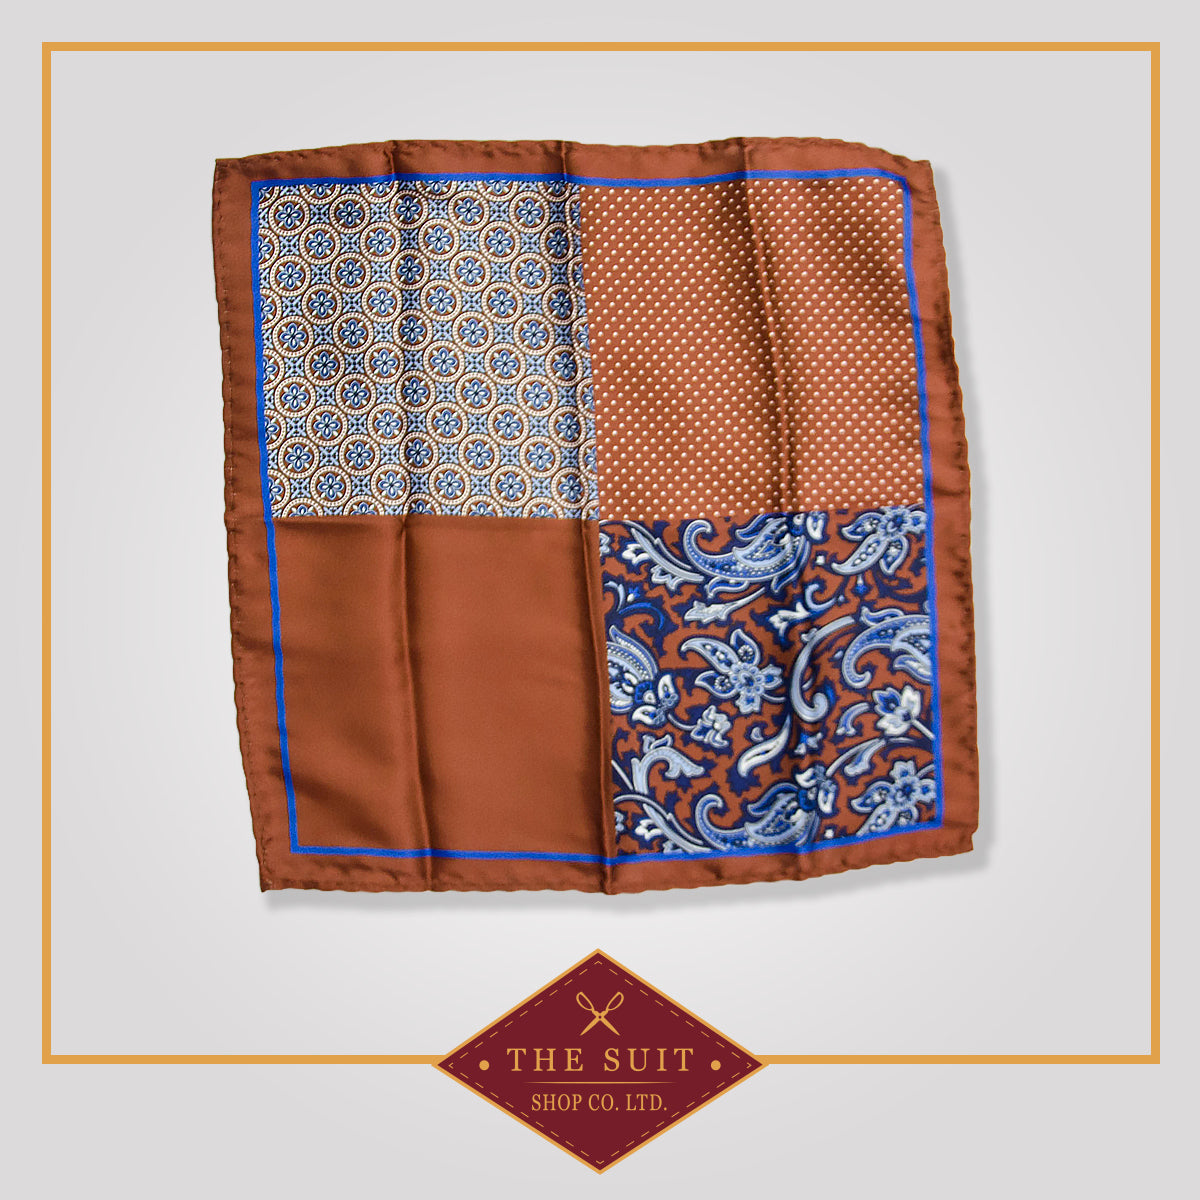 Sepia Skin and Biscay Patterned Pocket Square